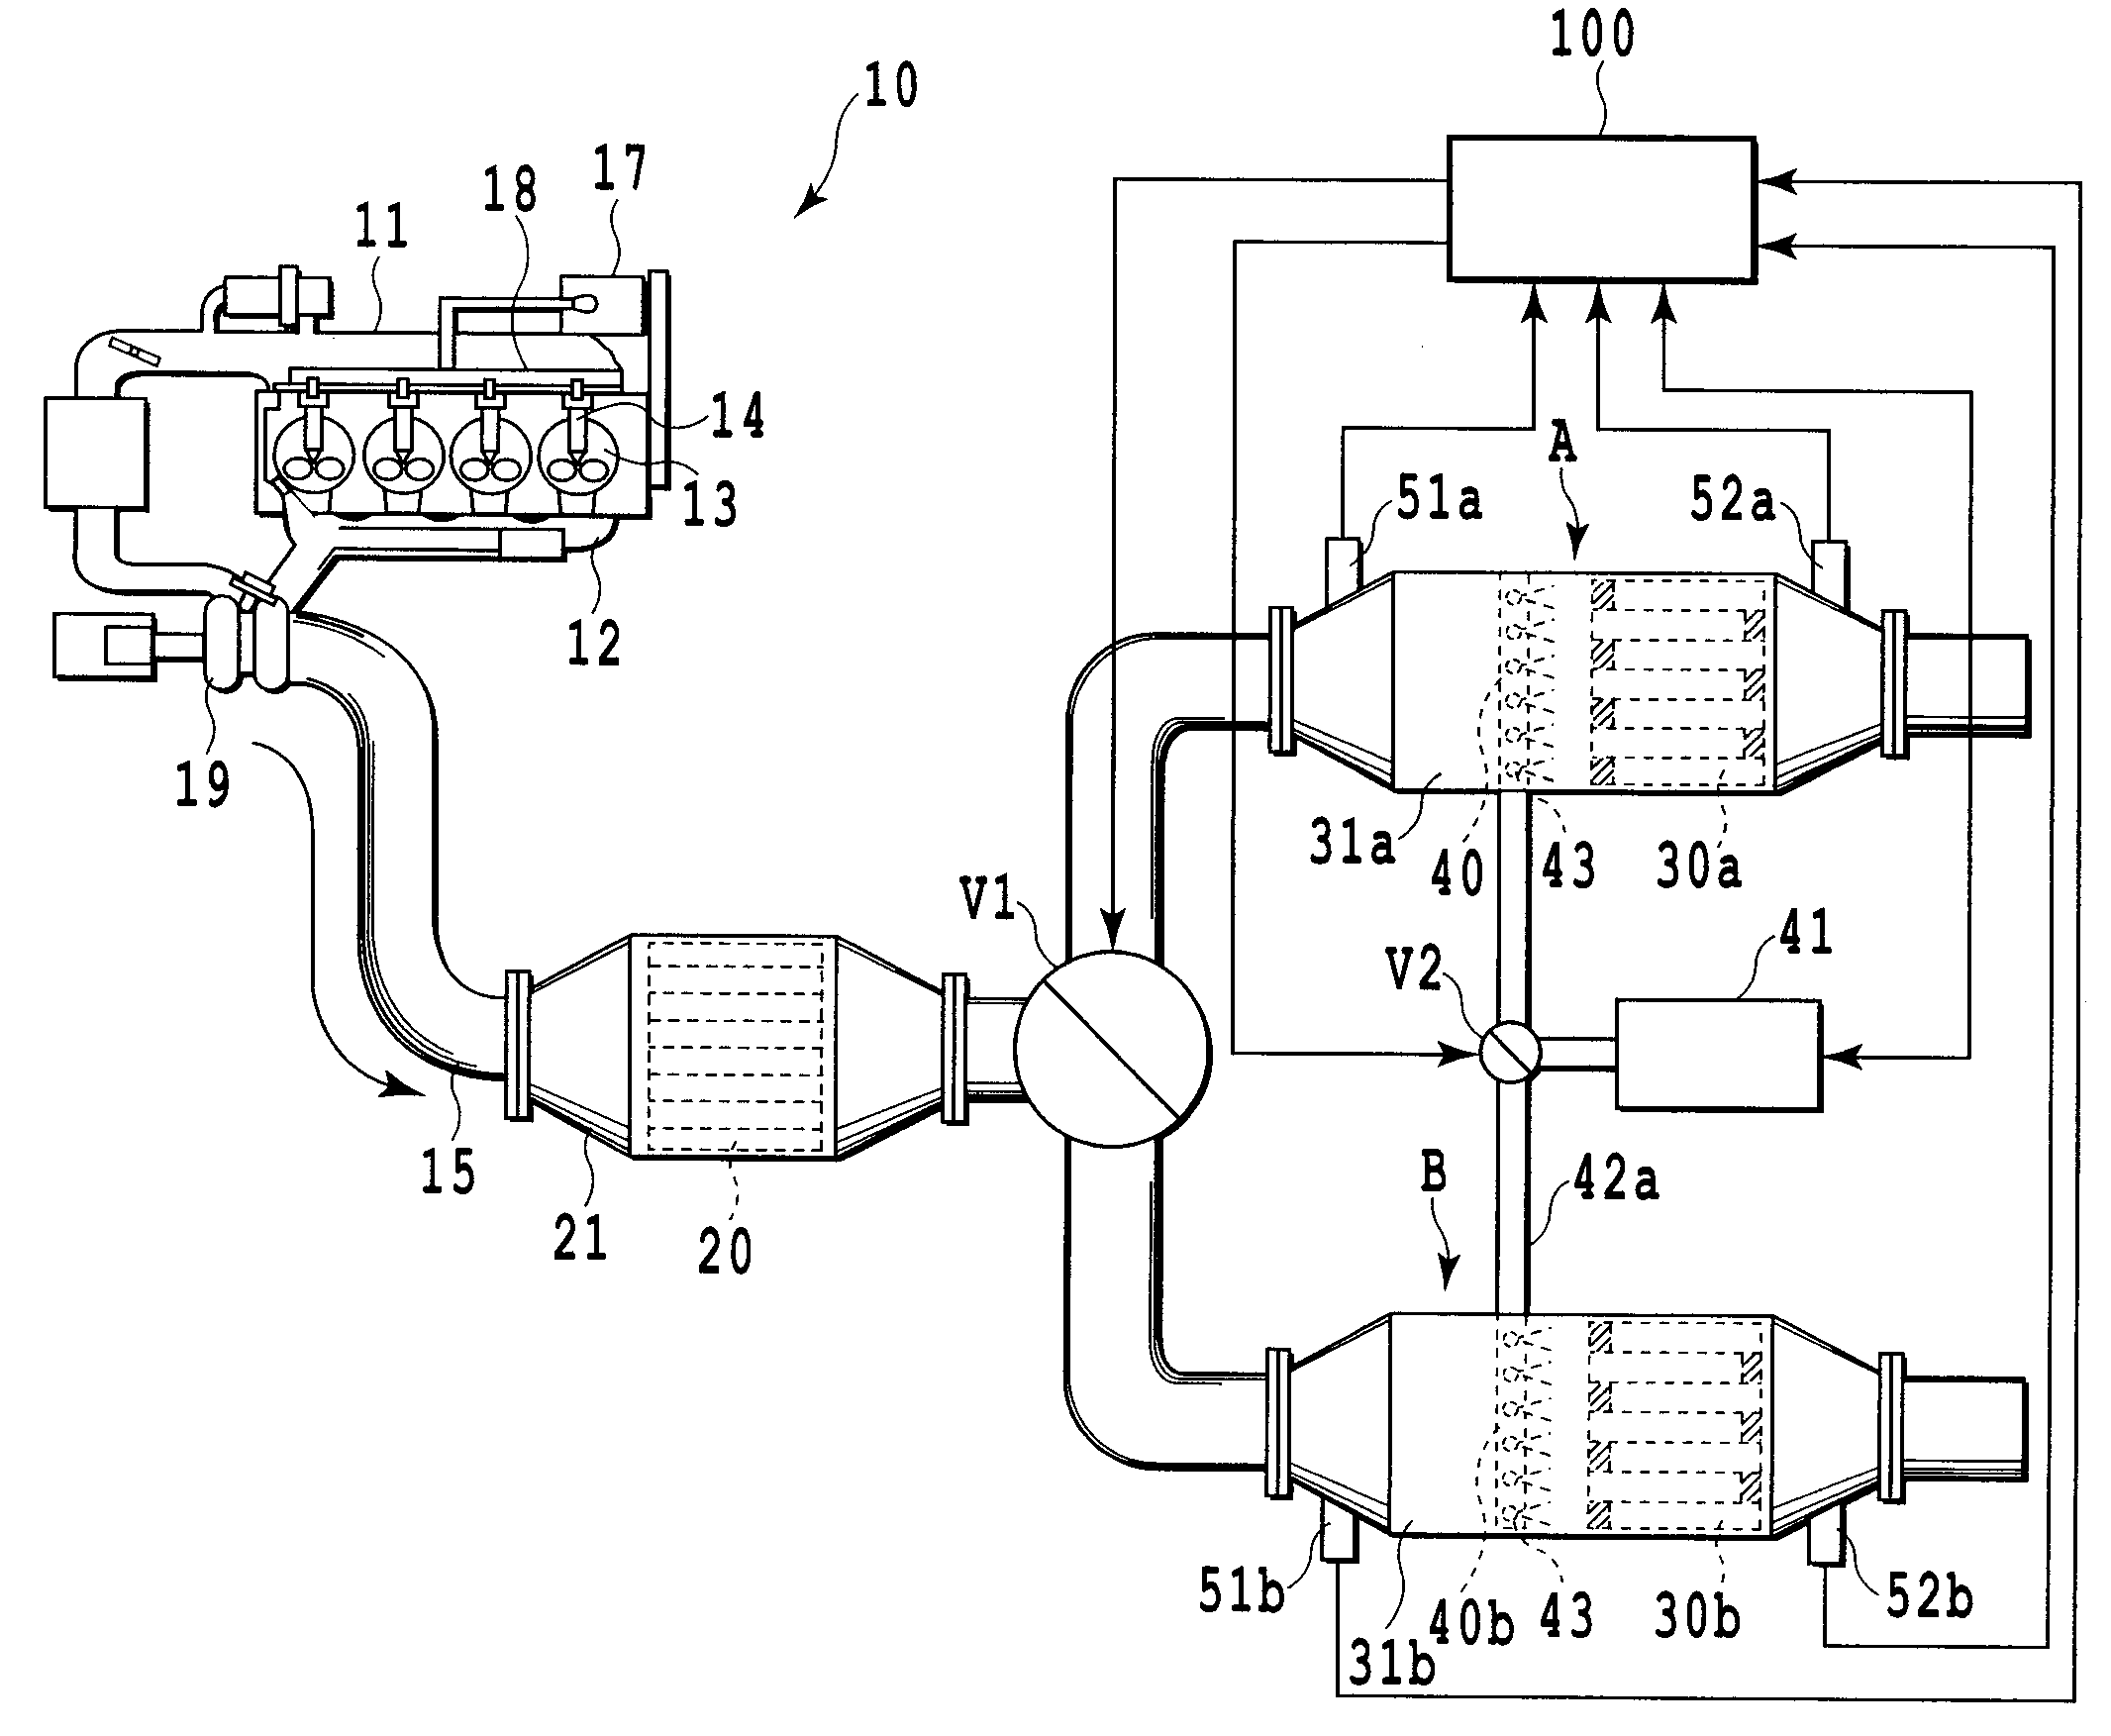 Exhaust cleaner for internal combustion engine